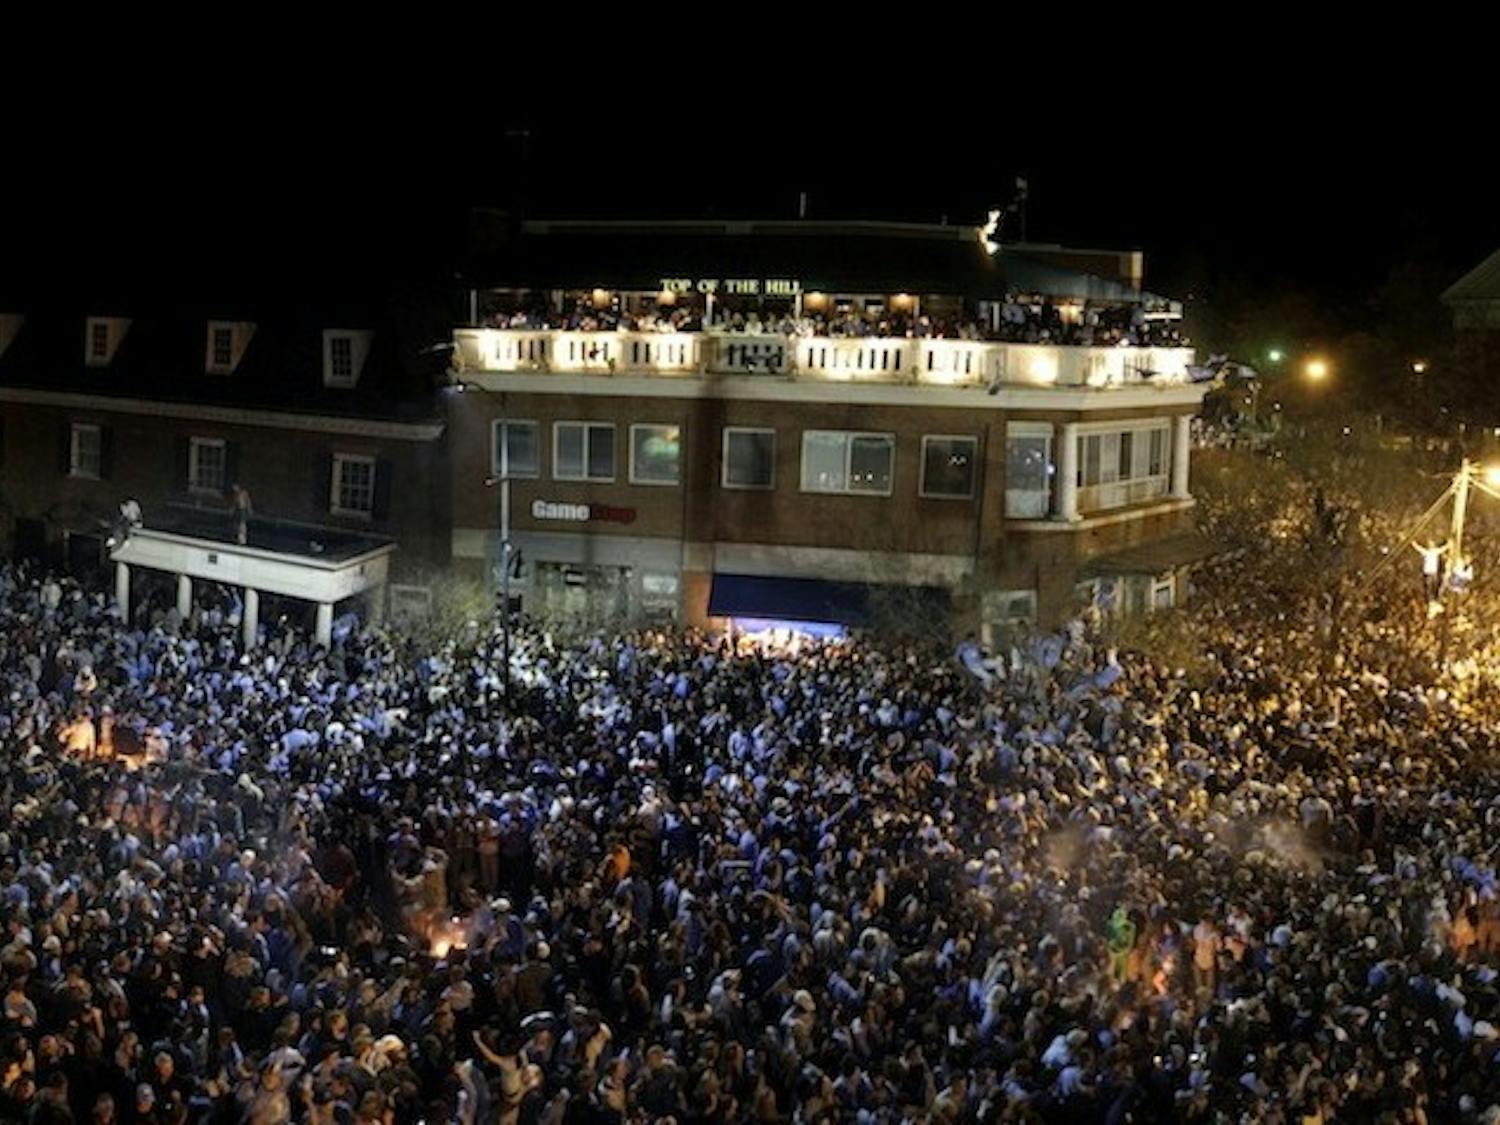 Franklin Street in Chapel Hill erupts as thousands of Tar Heel fans celebrate UNC's 89-72 victory over Michigan State in the 2009 NCAA men's basketball championship